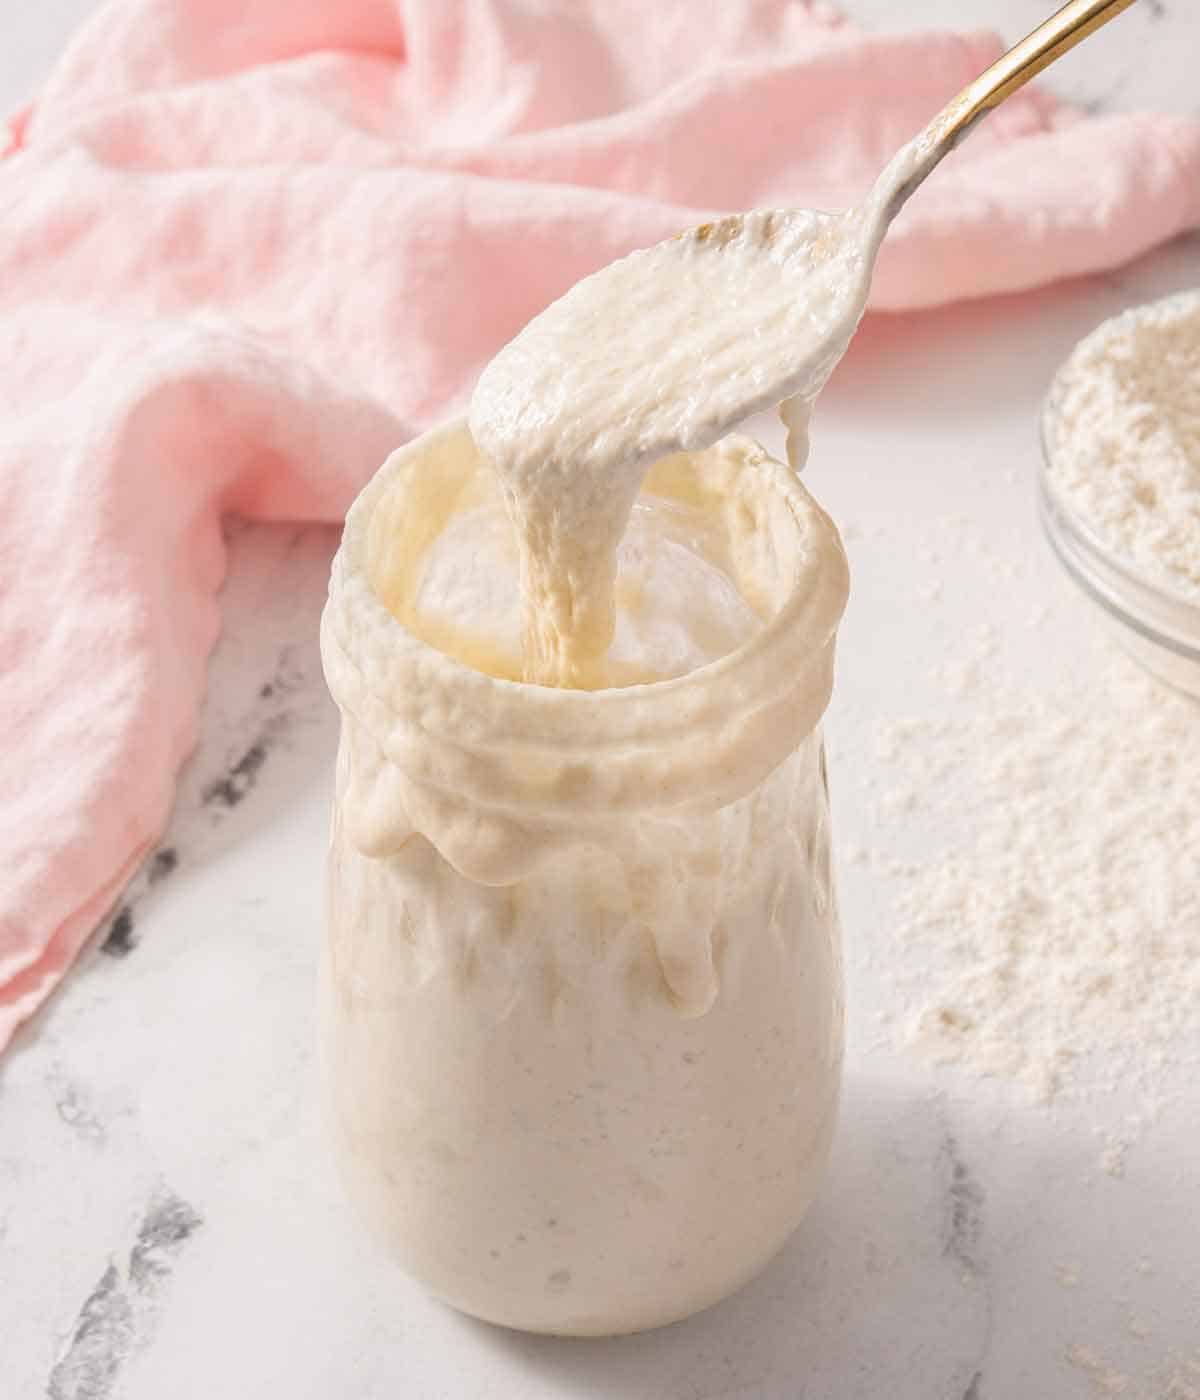 A mason jar of sourdough starter with a spoon scooping some out.